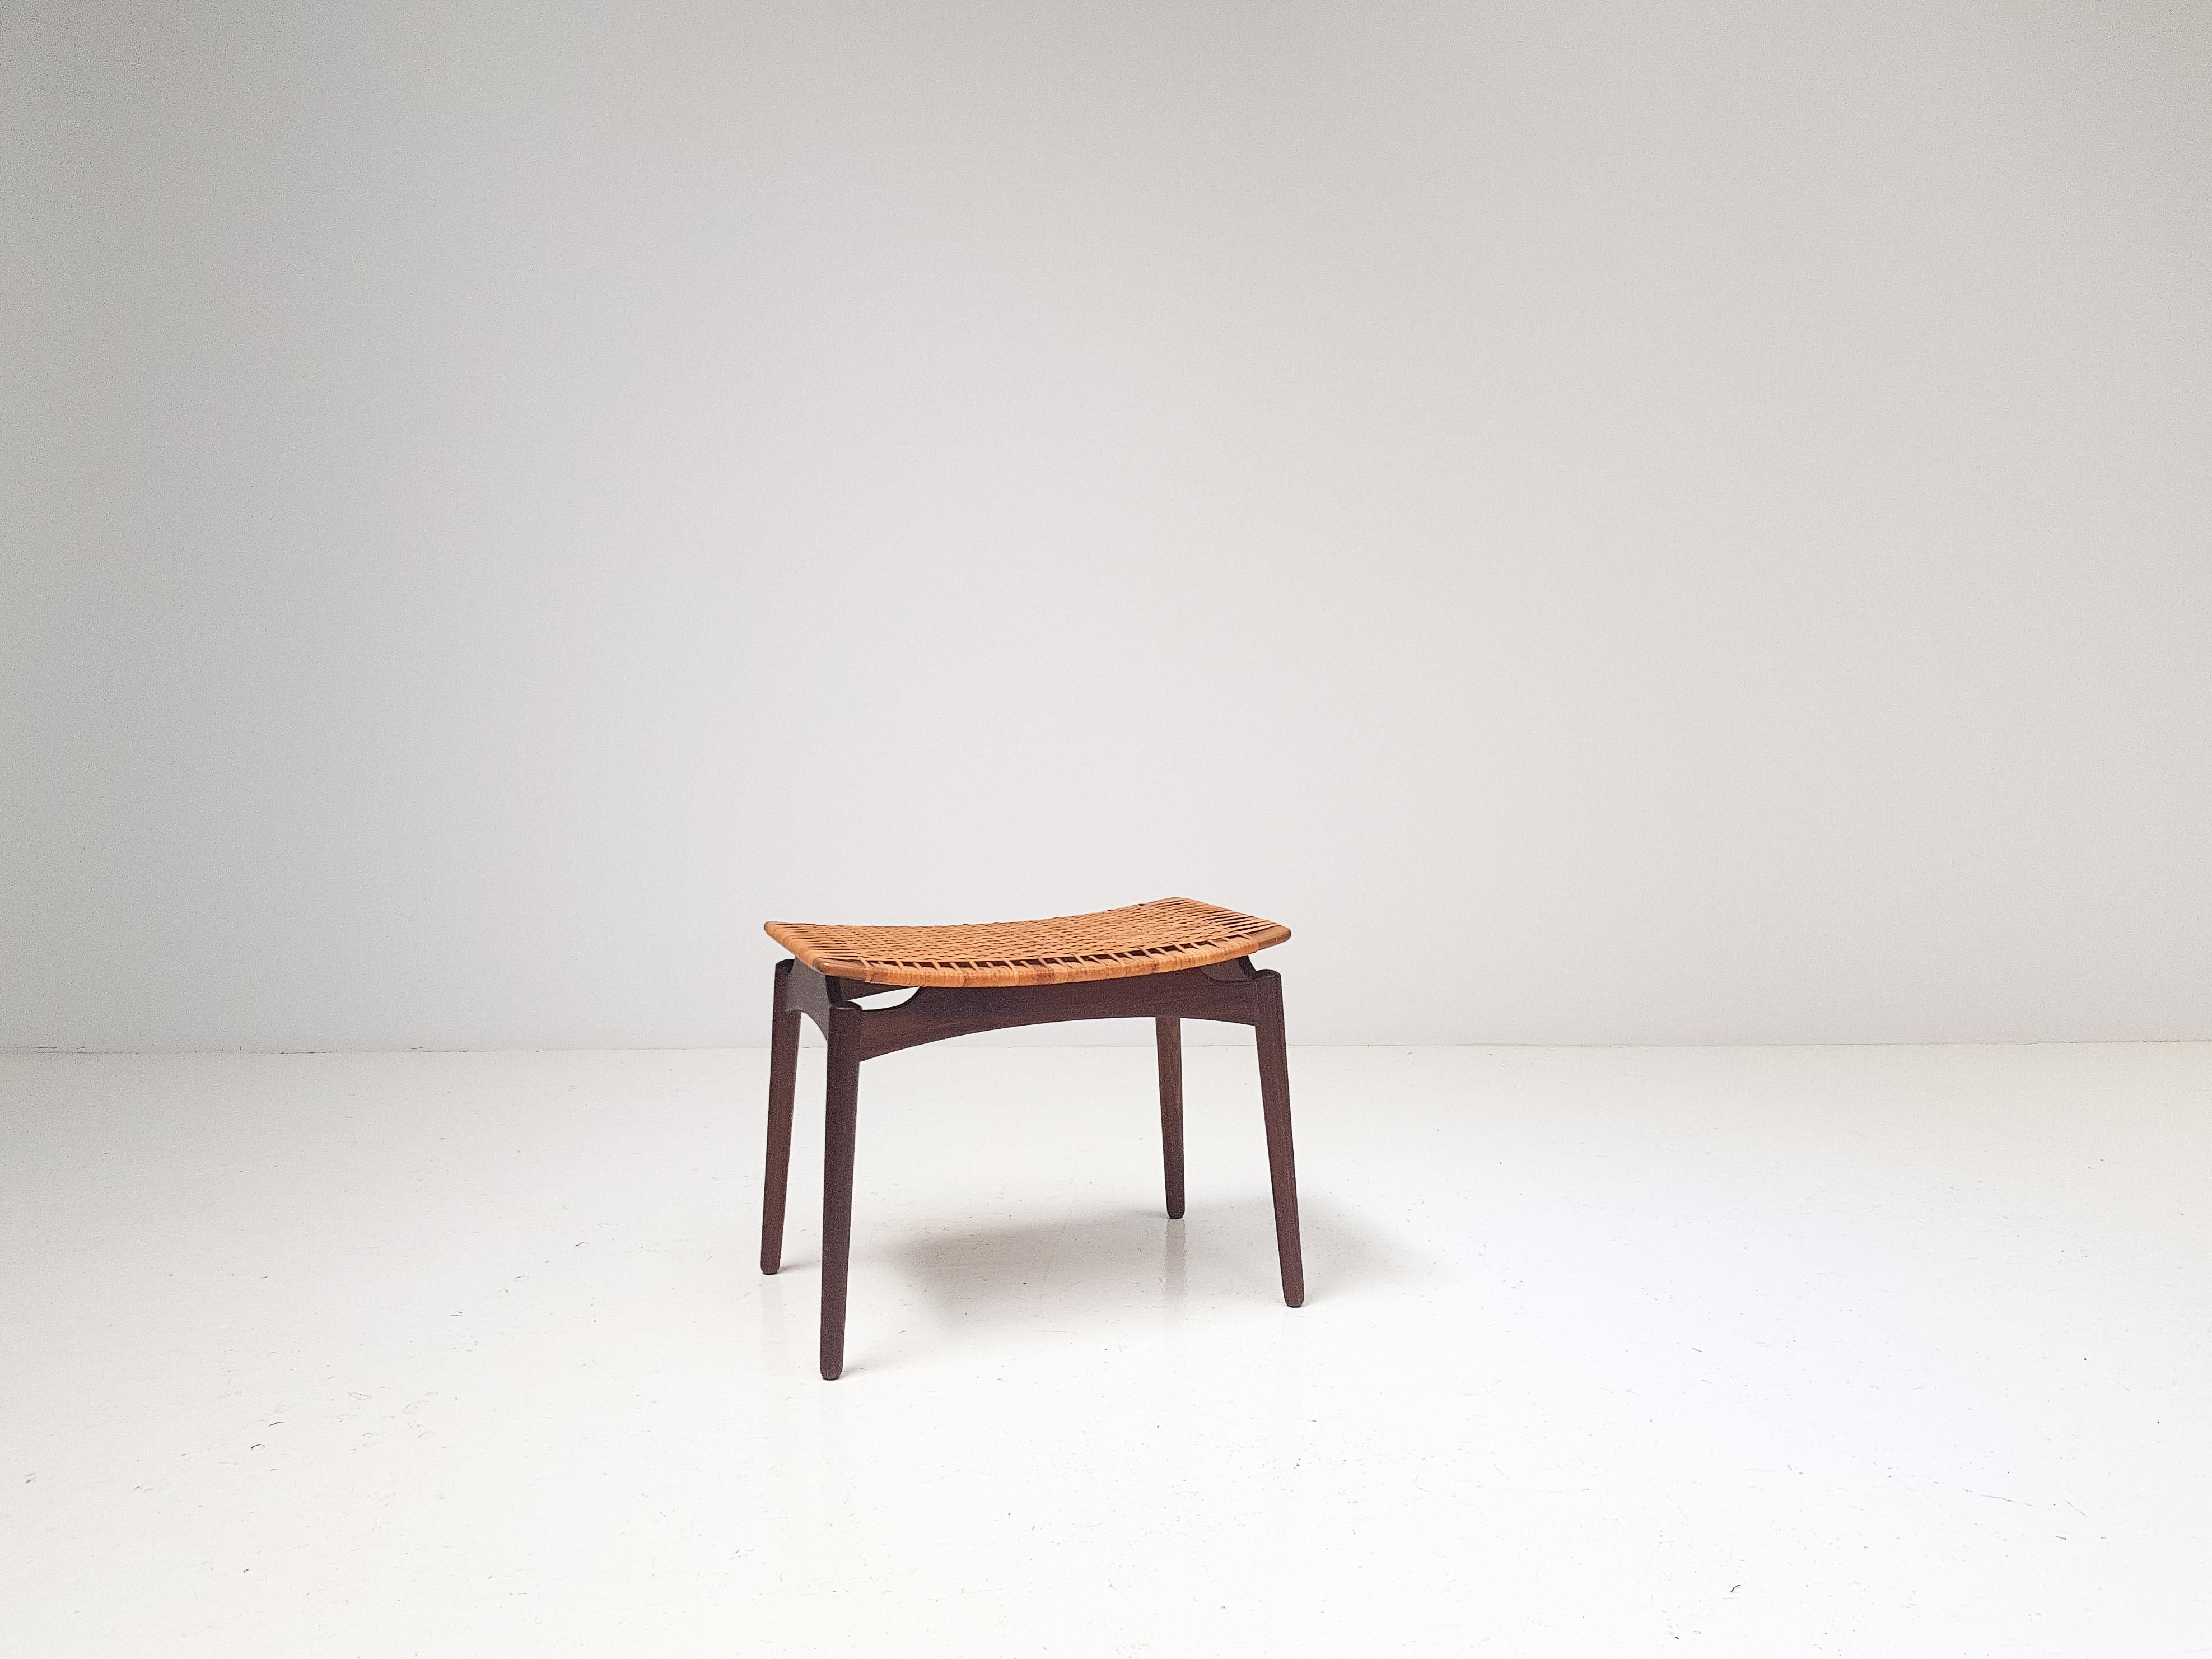 A woven cane and teak stool, by Olholm Denmark dating from the 1950s.

With tapered legs and having a curved woven seat it gives the stool a floating appearance and overall has a very elegant look.

The design is reminiscent of one by Finn